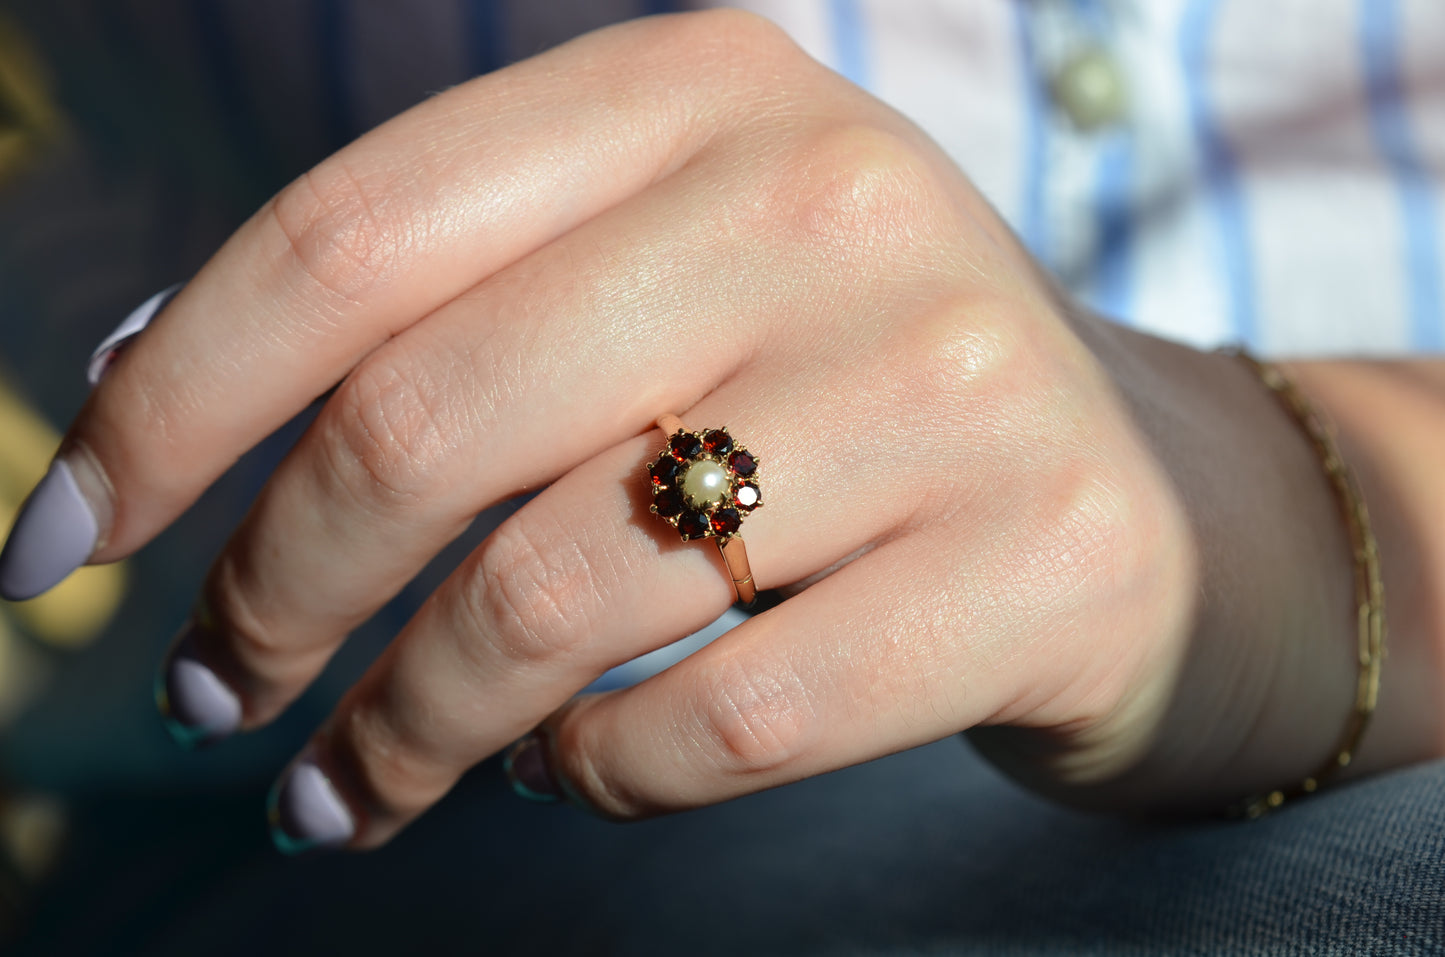 Rich Retro Pearl and Garnet Cluster Ring